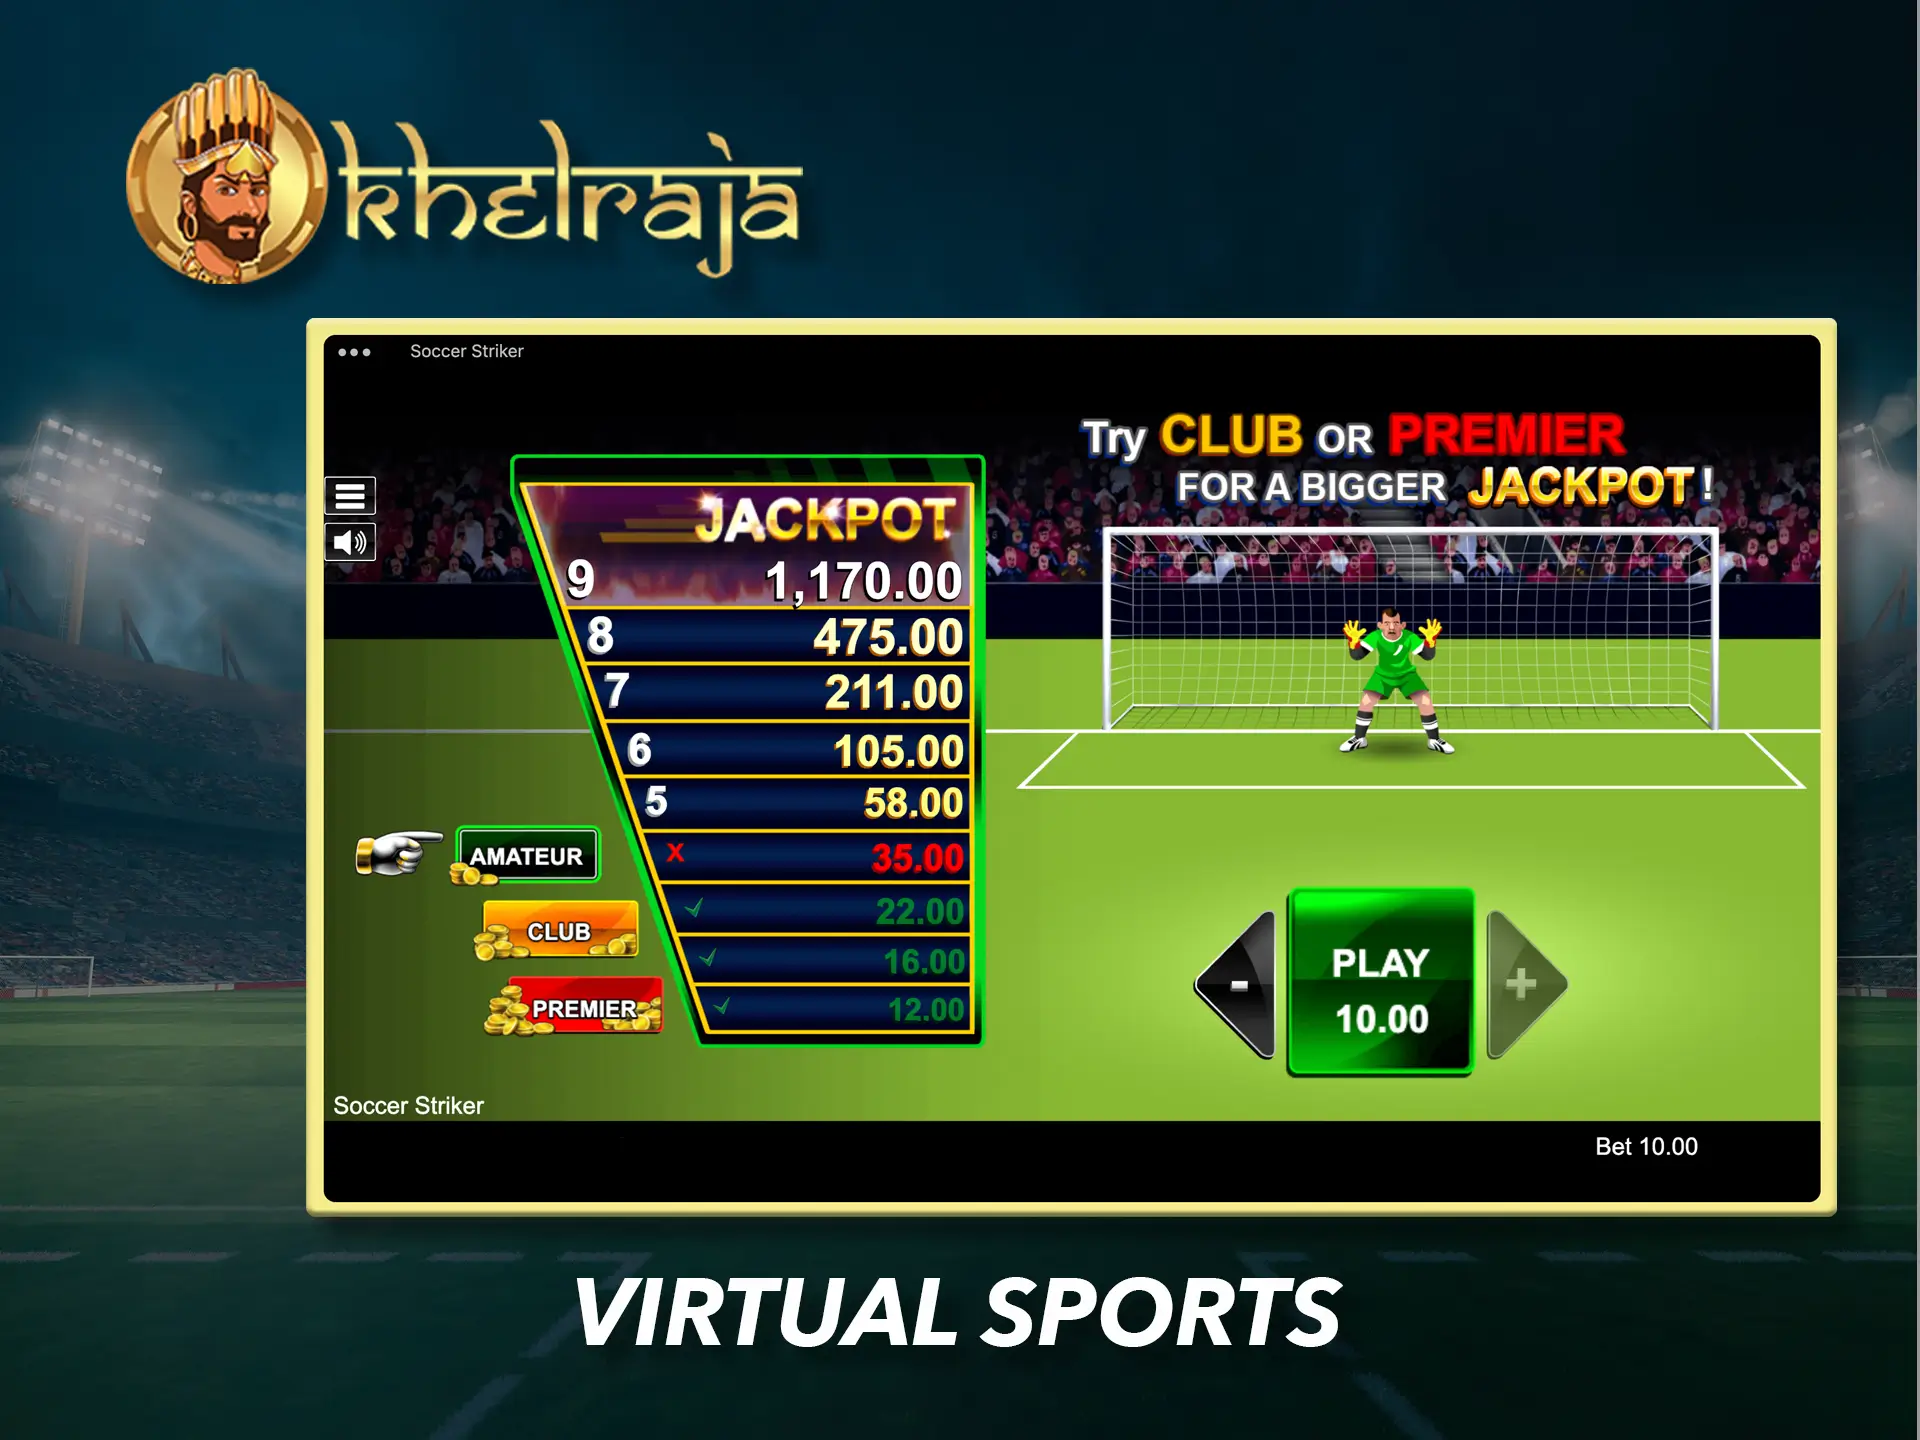 Test your luck in a football simulator from Khelraja.